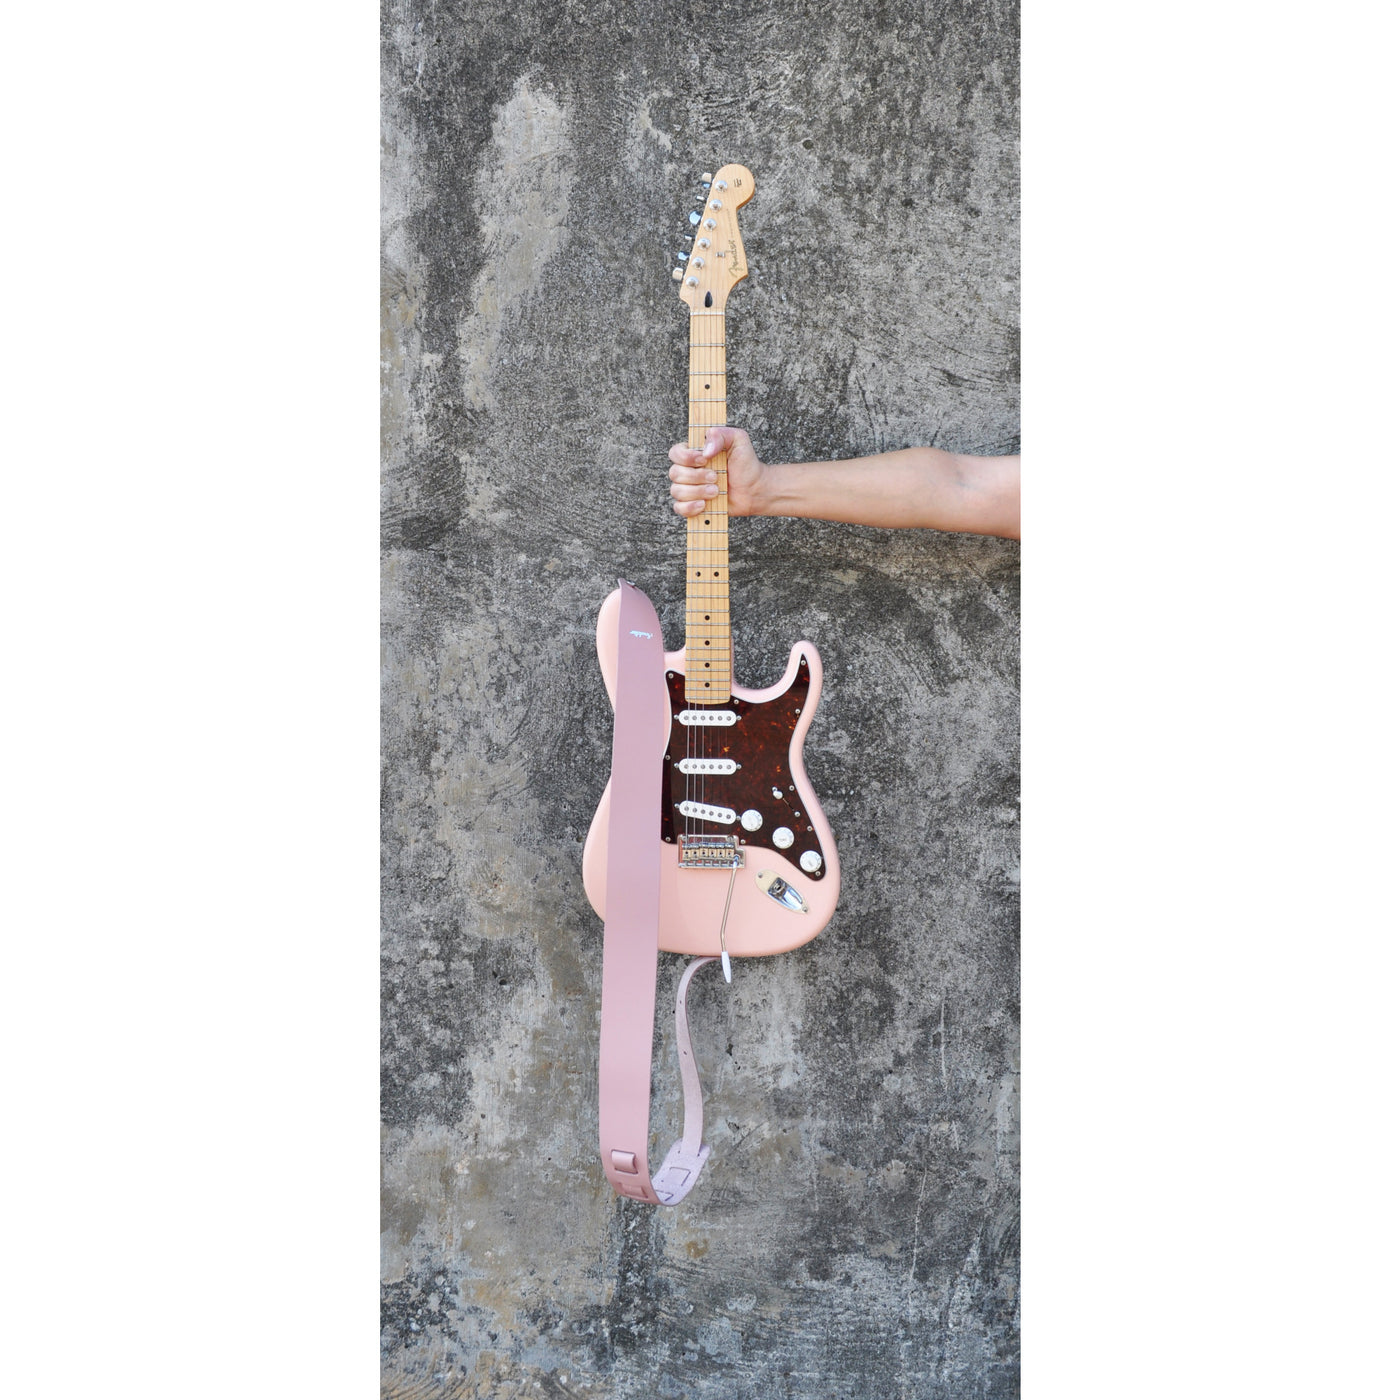 Souldier GS0366BK02BK - Handmade Seatbelt Guitar Strap for Bass, Electric or Acoustic Guitar, 2 Inches Wide and Adjustable Length from 30" to 63"  Made in the USA, Clapton, Red